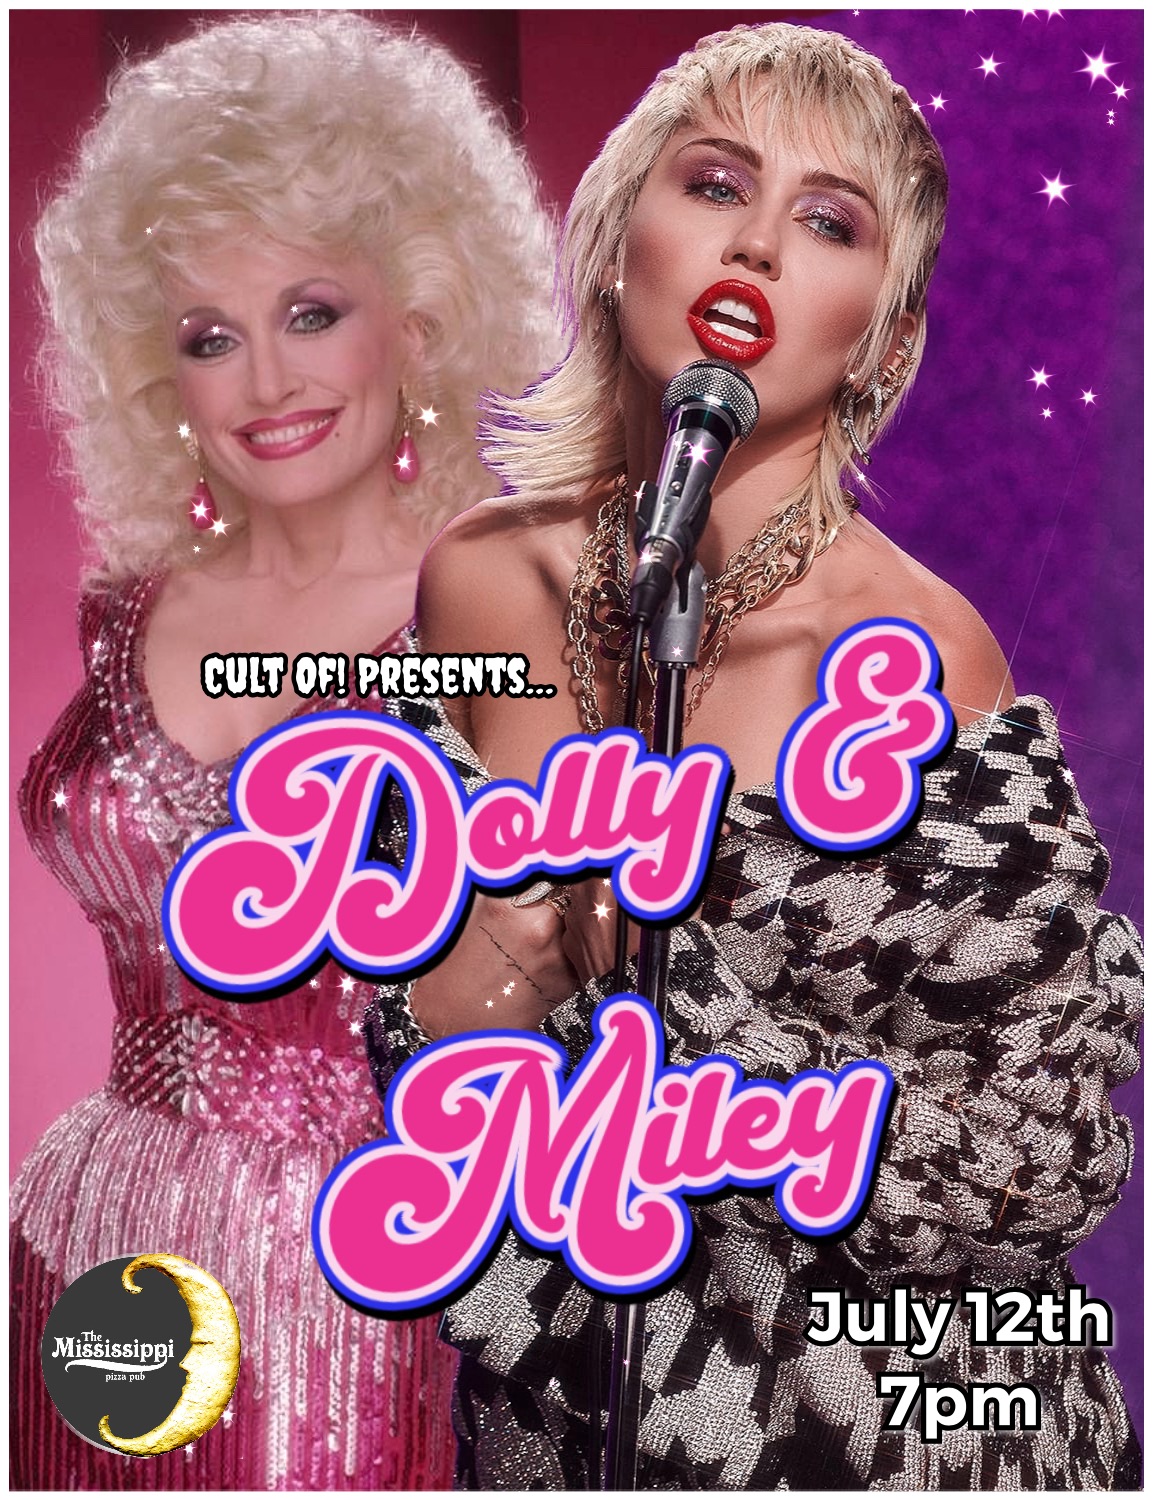 Cult of Dolly & Miley. A Dolly Parton and Miley Cyrus Drag Show